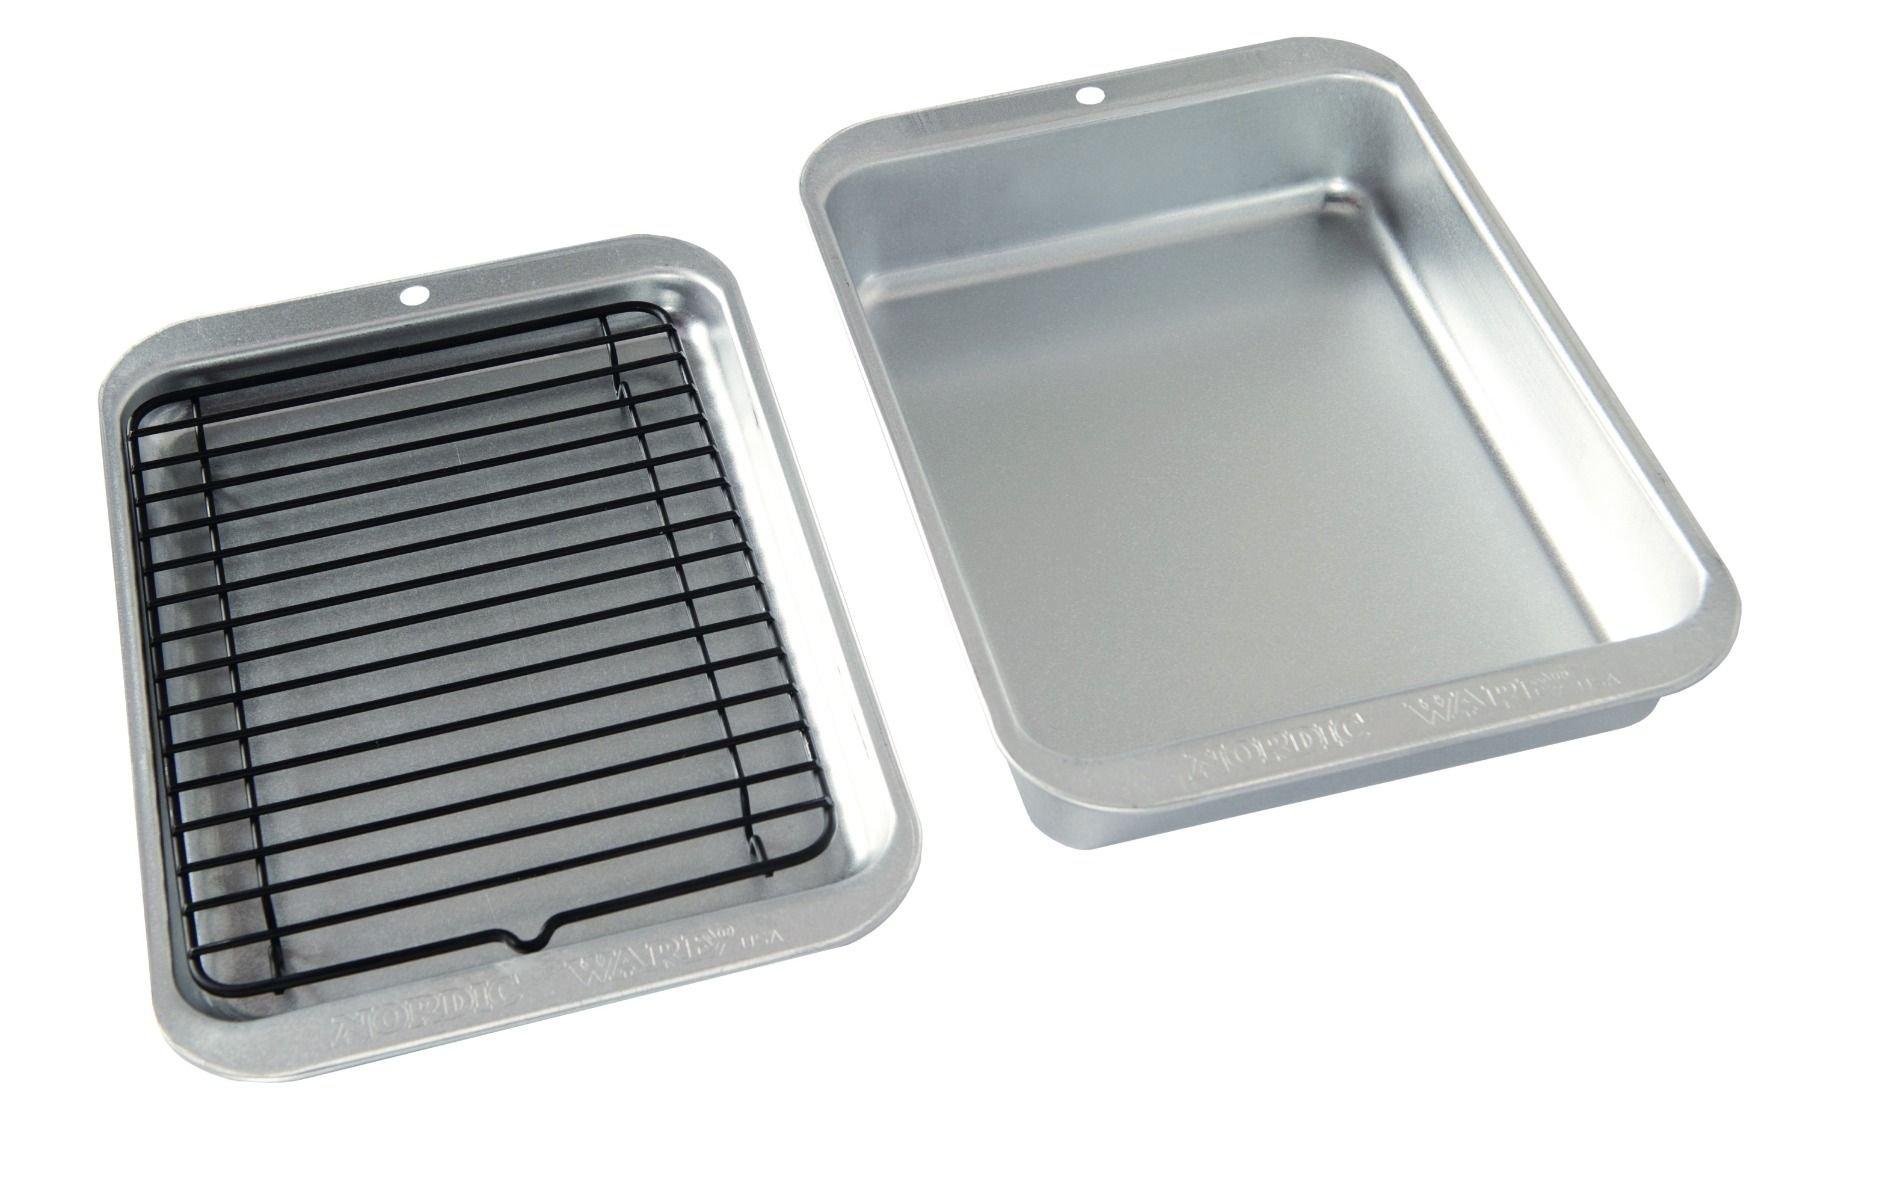 Nordic Ware Compact 3 pc Broil & Bake